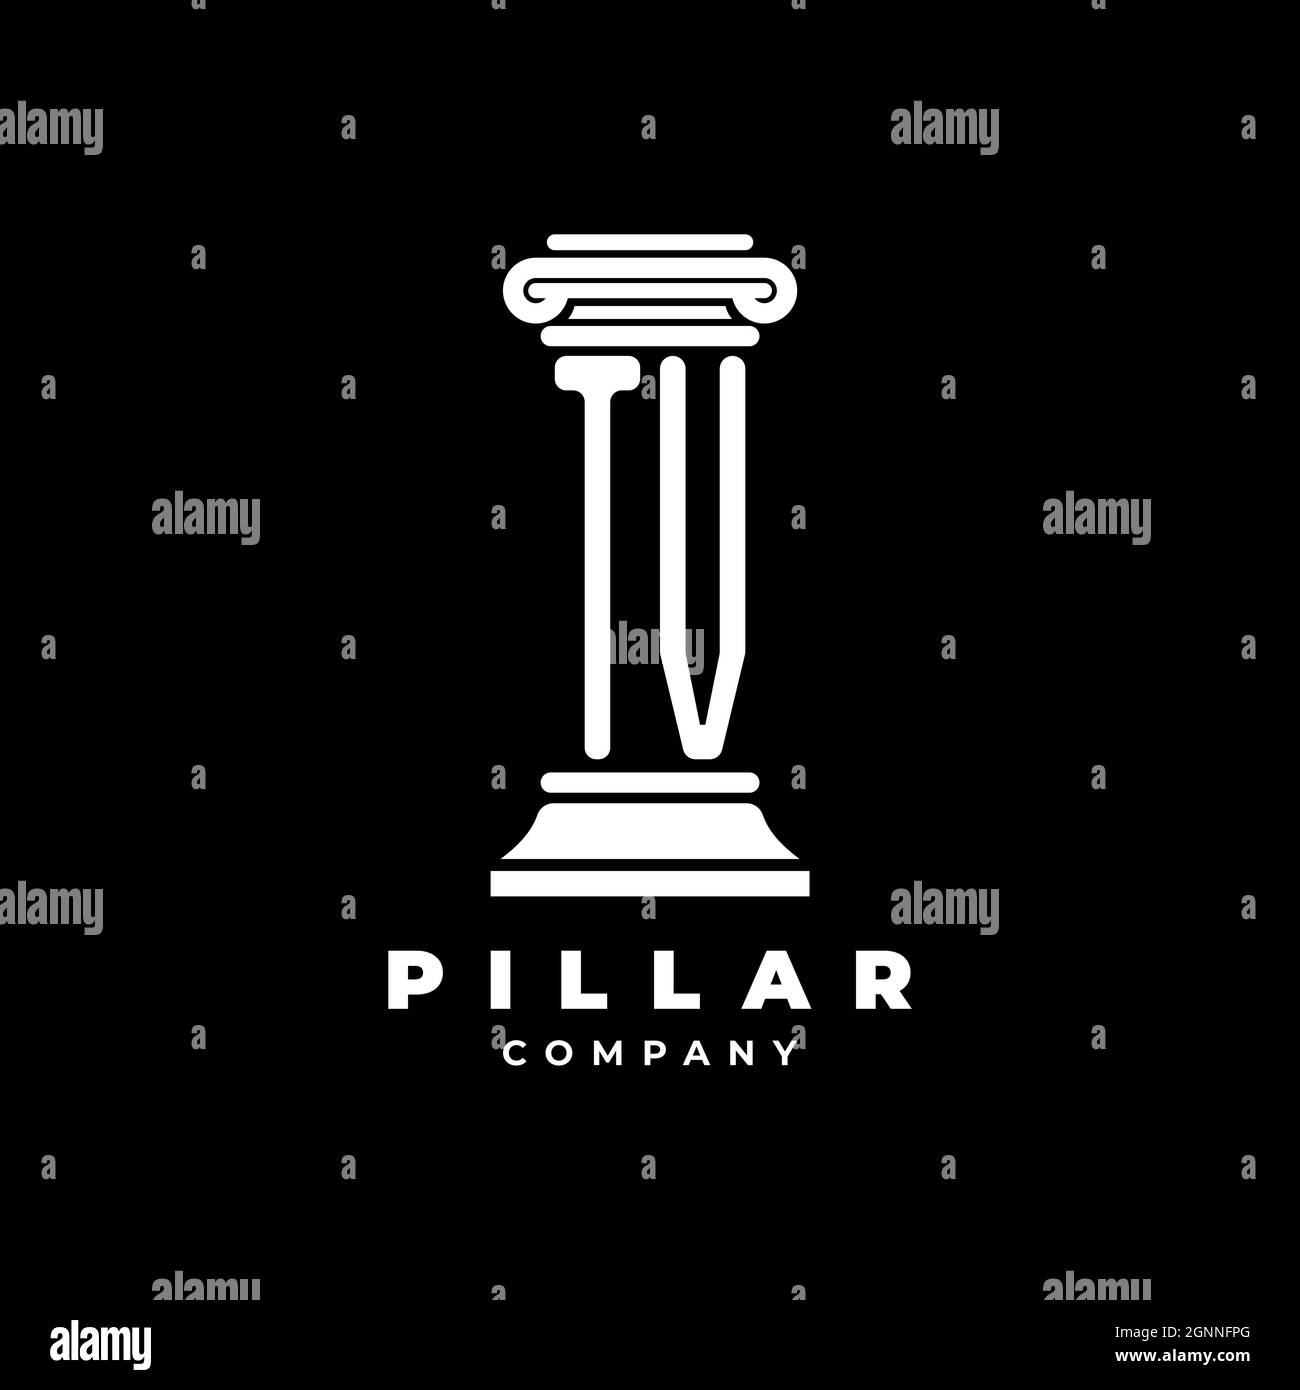 TV Monogram Logo Letter Pillars shape lawyer style vector, law firm company isolated in black background Stock Vector